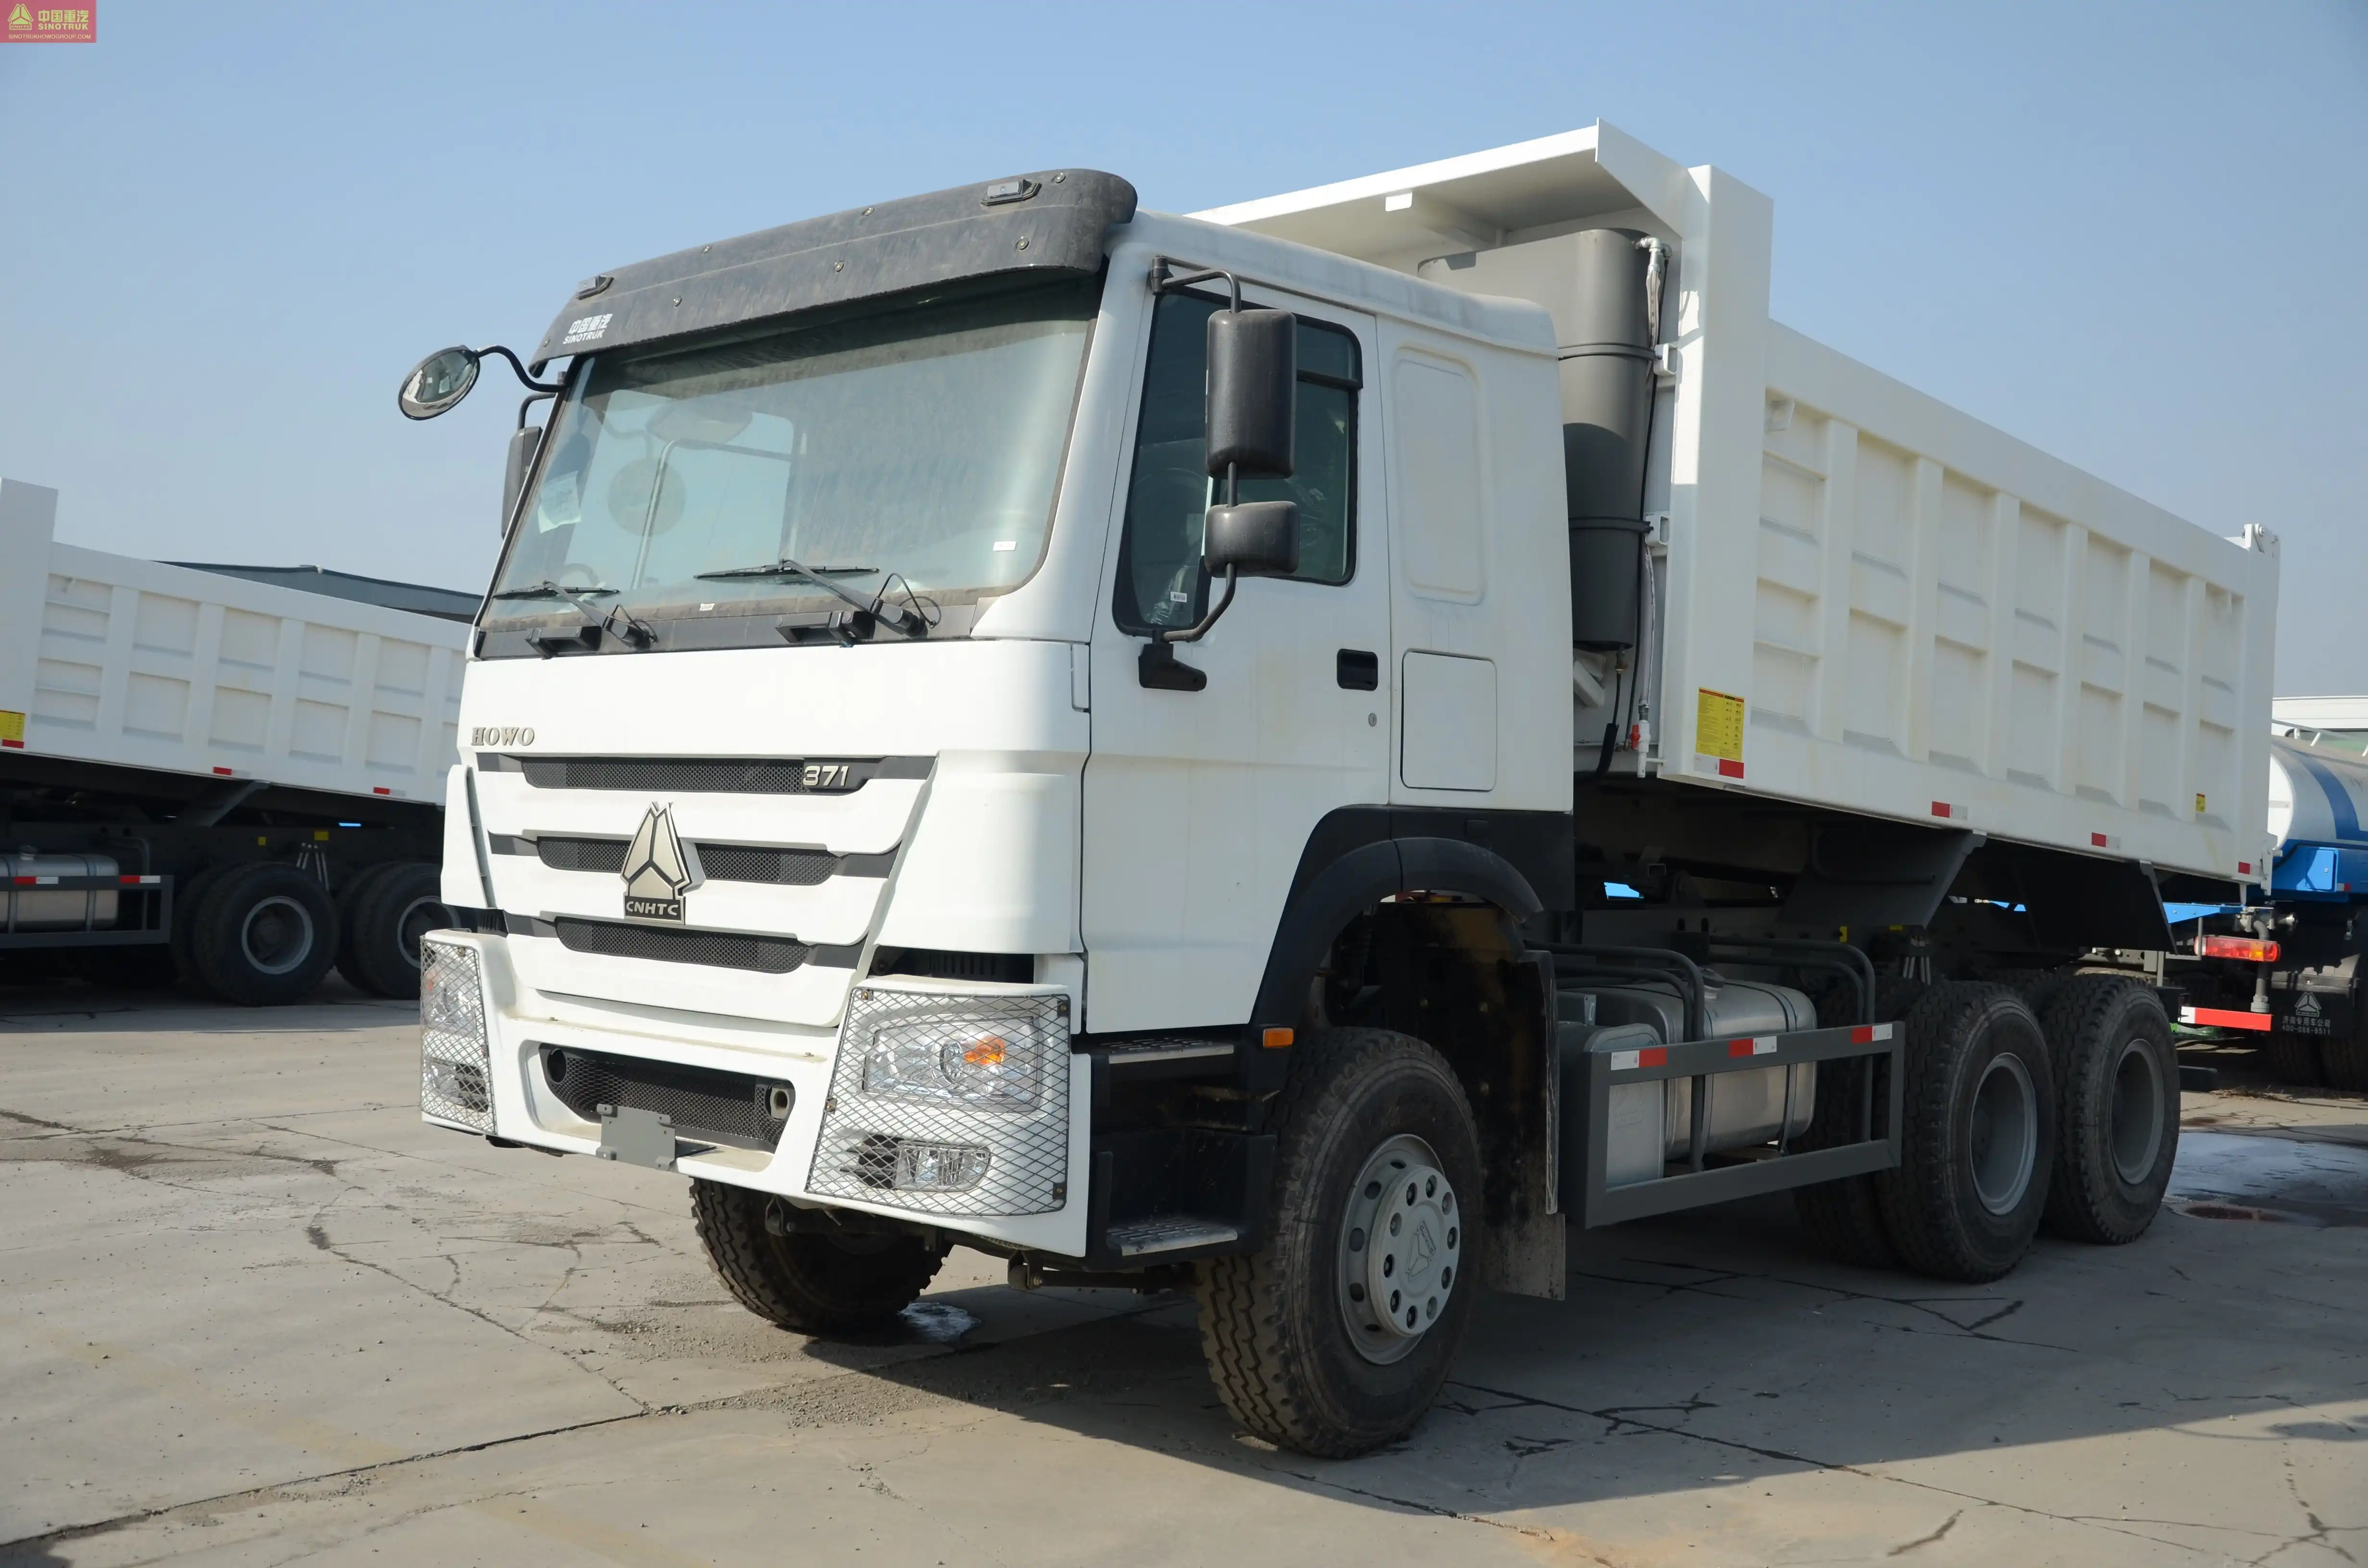 china largest truck manufacturer